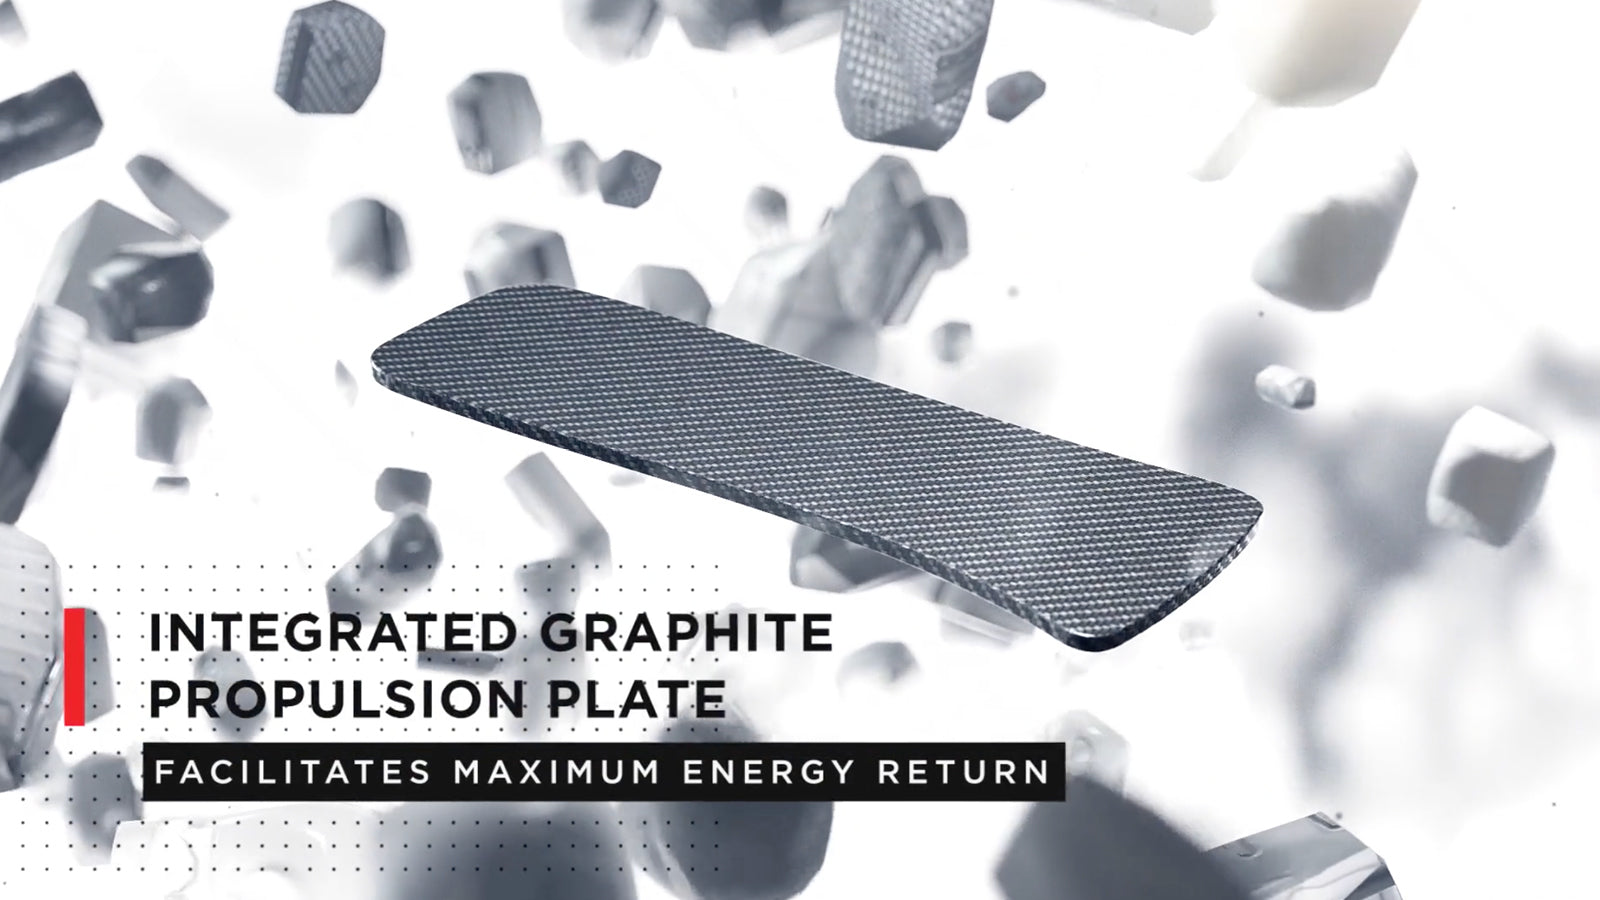 Load video: CGI showing the integrated carbon fibre propulsion plate in the PAYNTR X-001 F